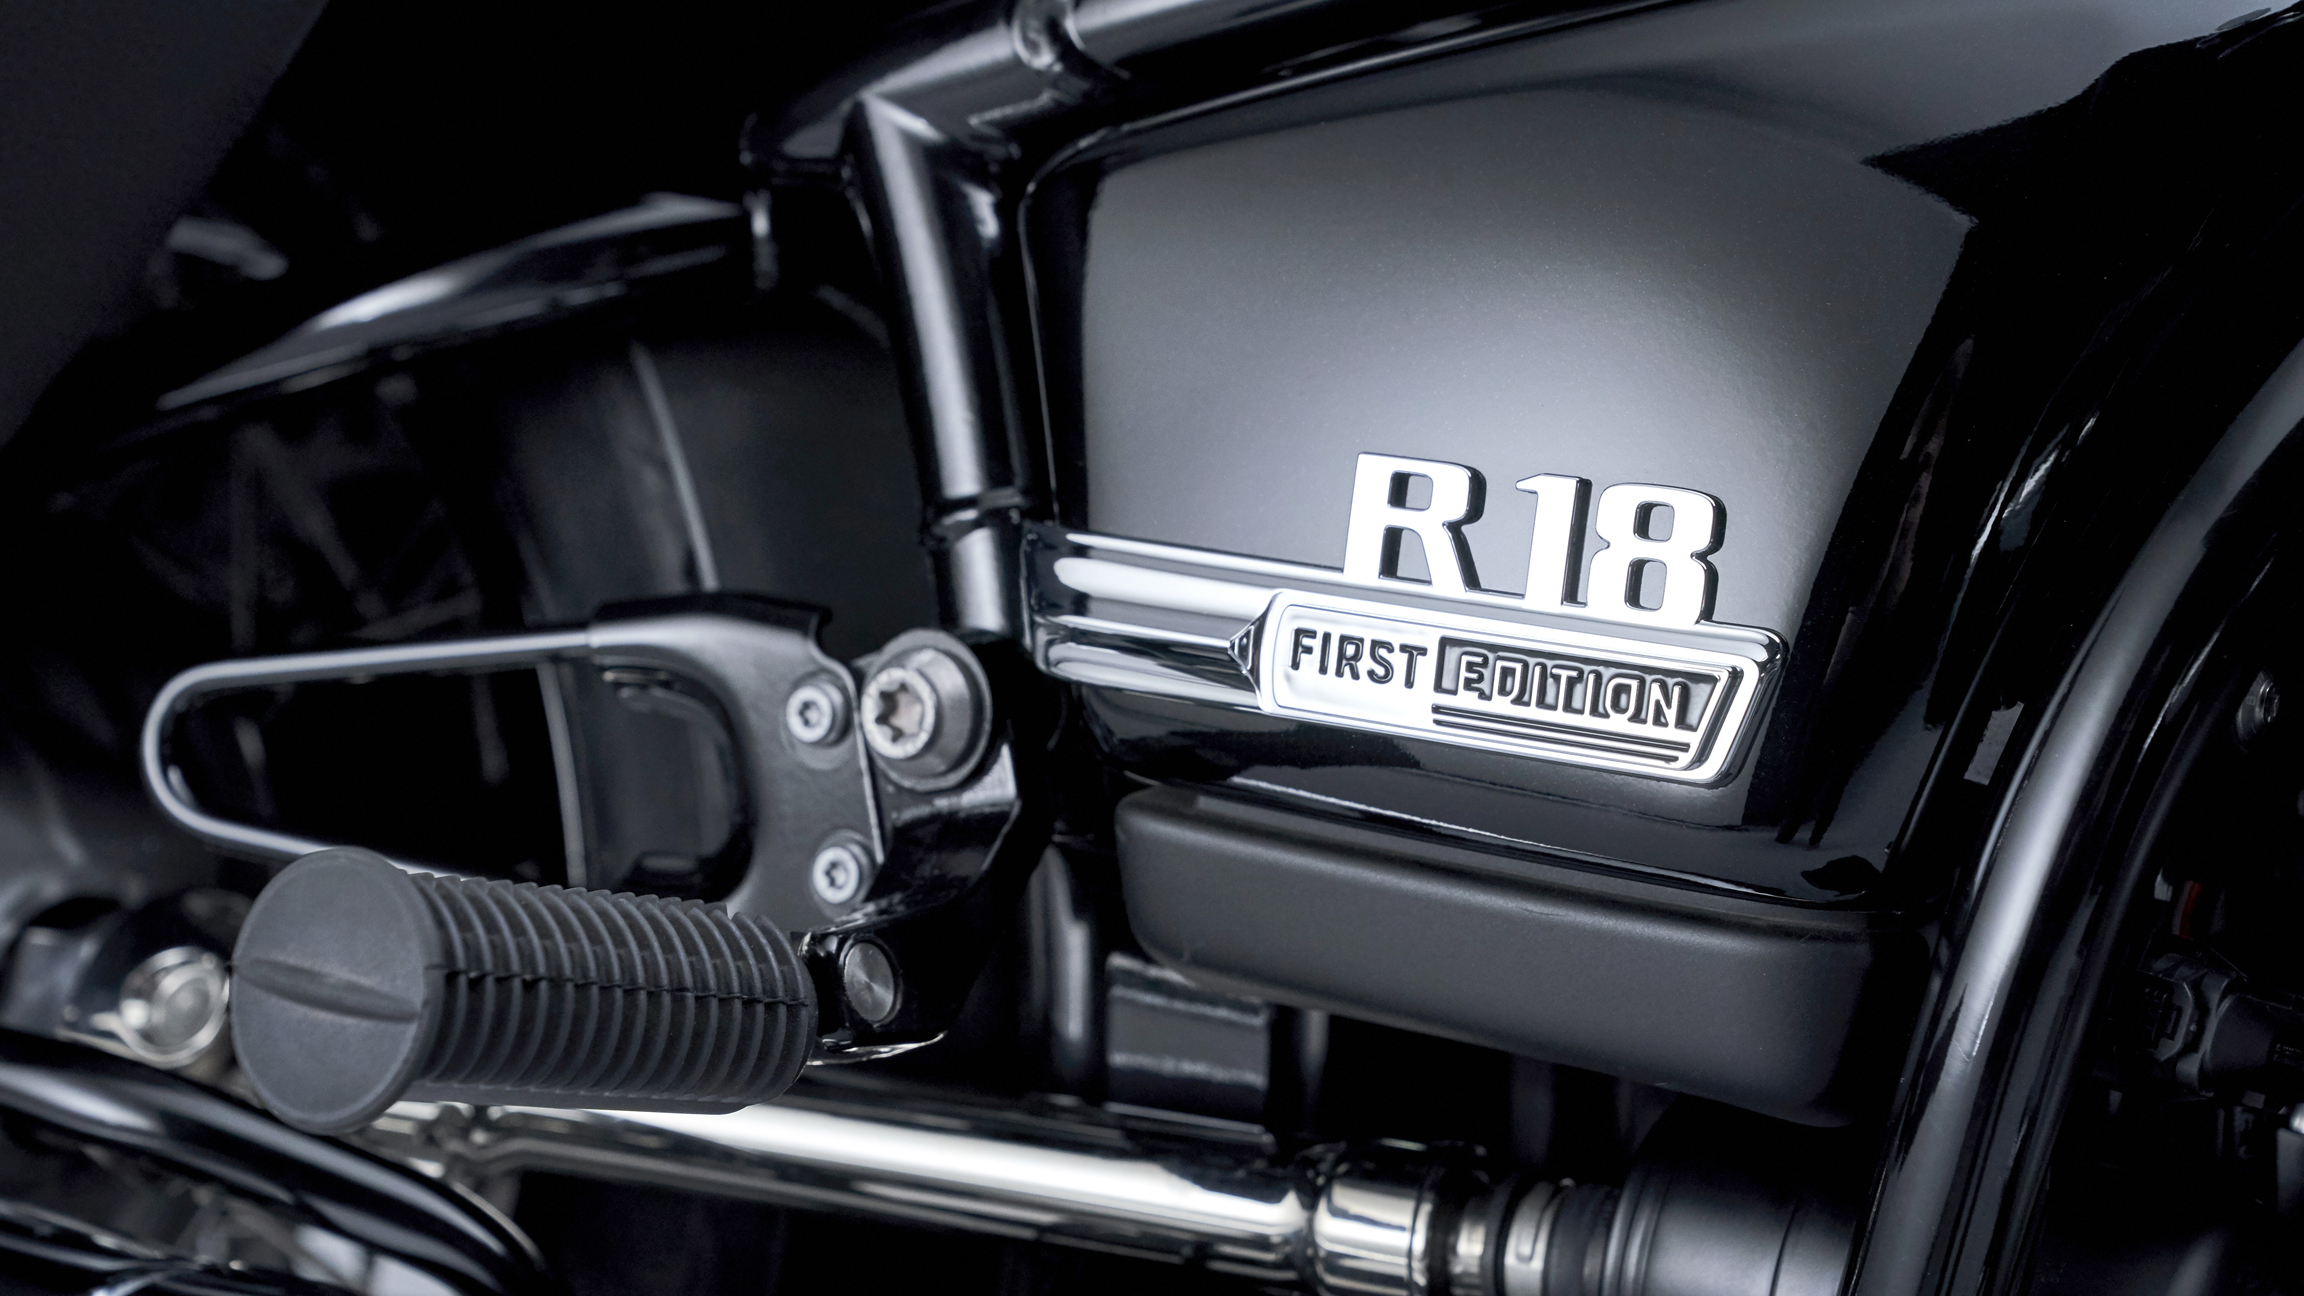 BMW introduces R 18 Classic and updated NineT motorcycle range